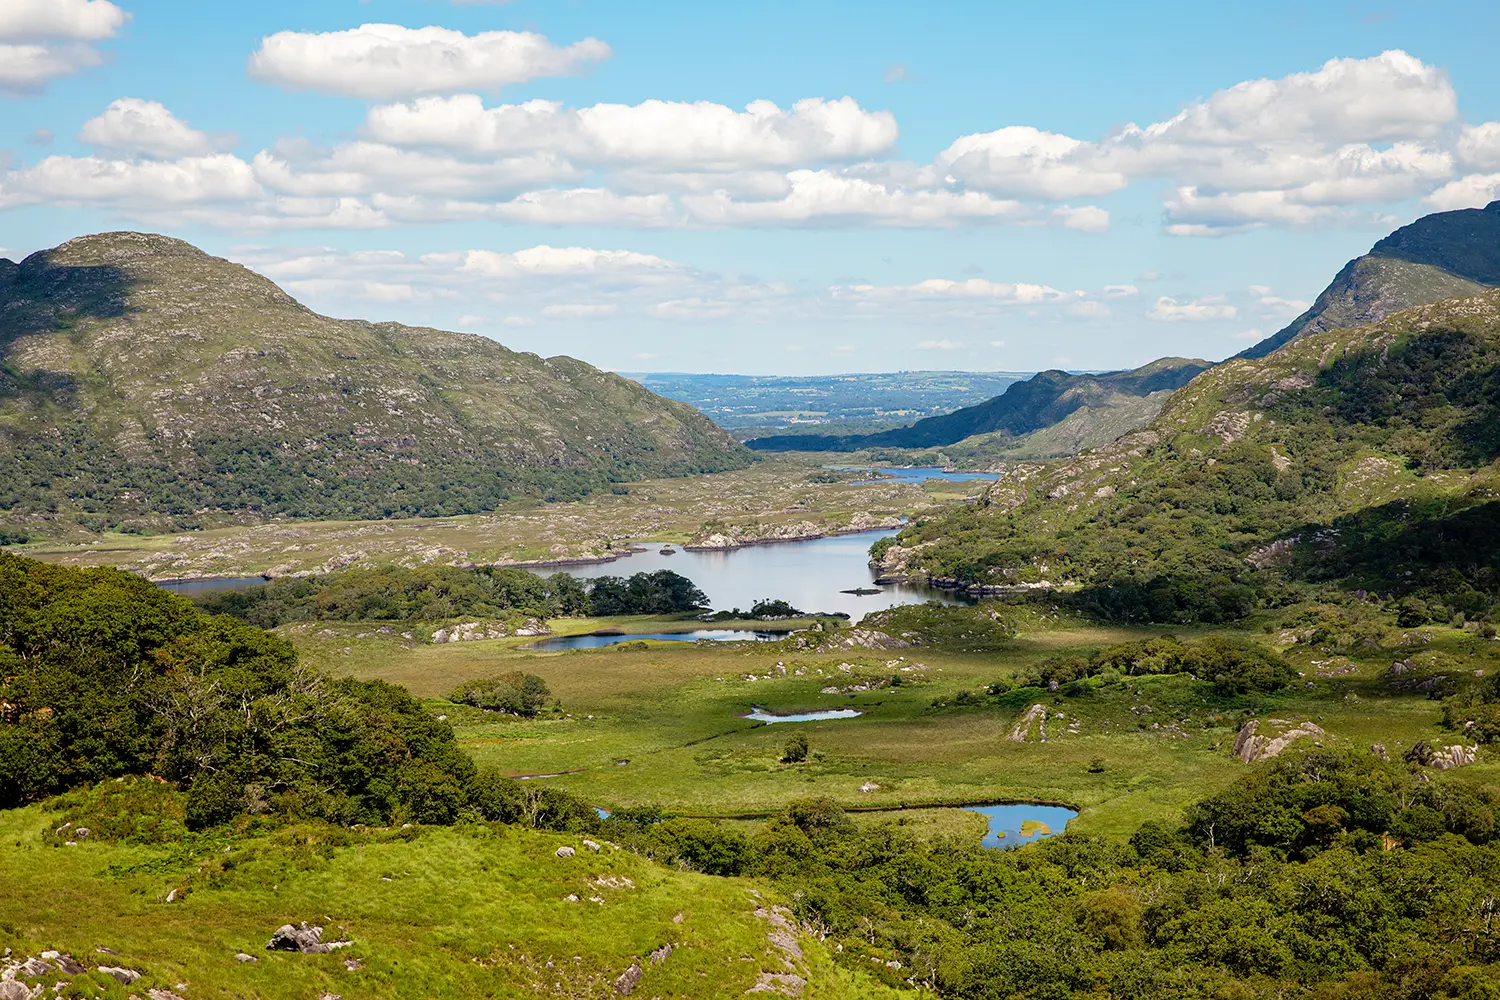 The famous Ladies View, Ring of Kerry, one of the best panoramas in Ireland